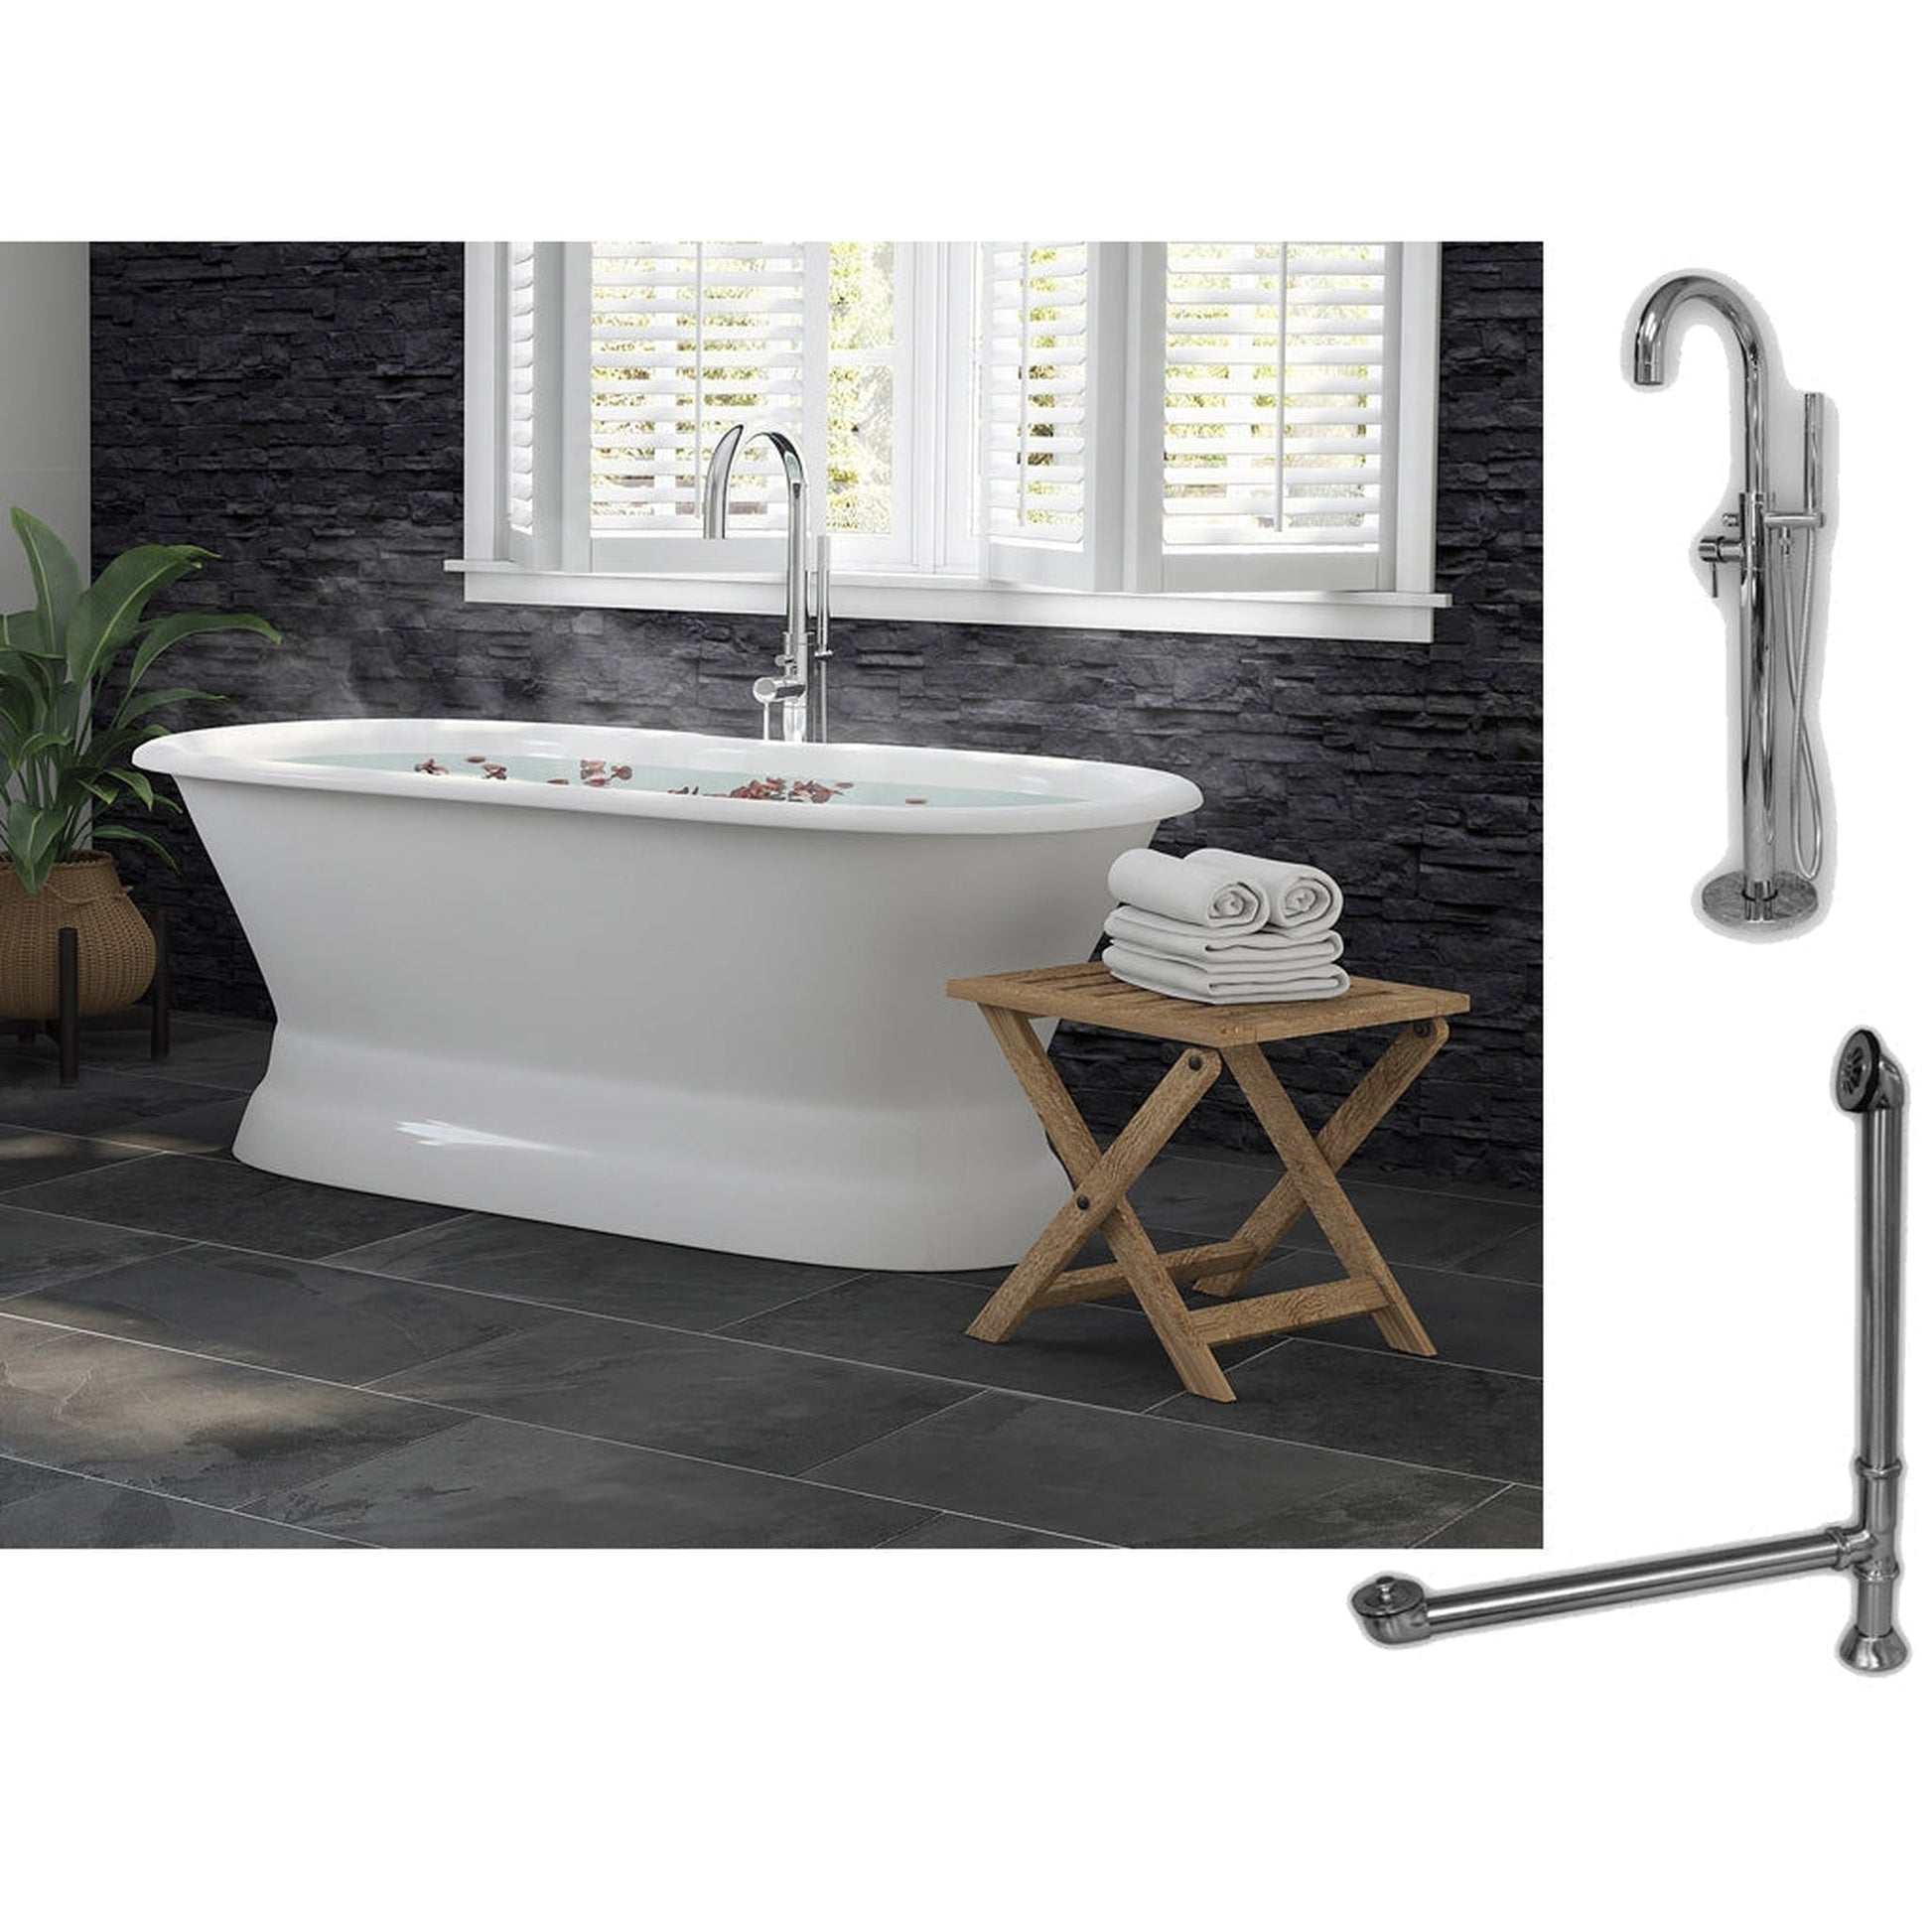 Cambridge Plumbing 60" White Cast Iron Double Ended Pedestal Bathtub With No Deck Holes And Complete Plumbing Package Including Modern Floor Mounted Faucet, Drain And Overflow Assembly In Polished Chrome